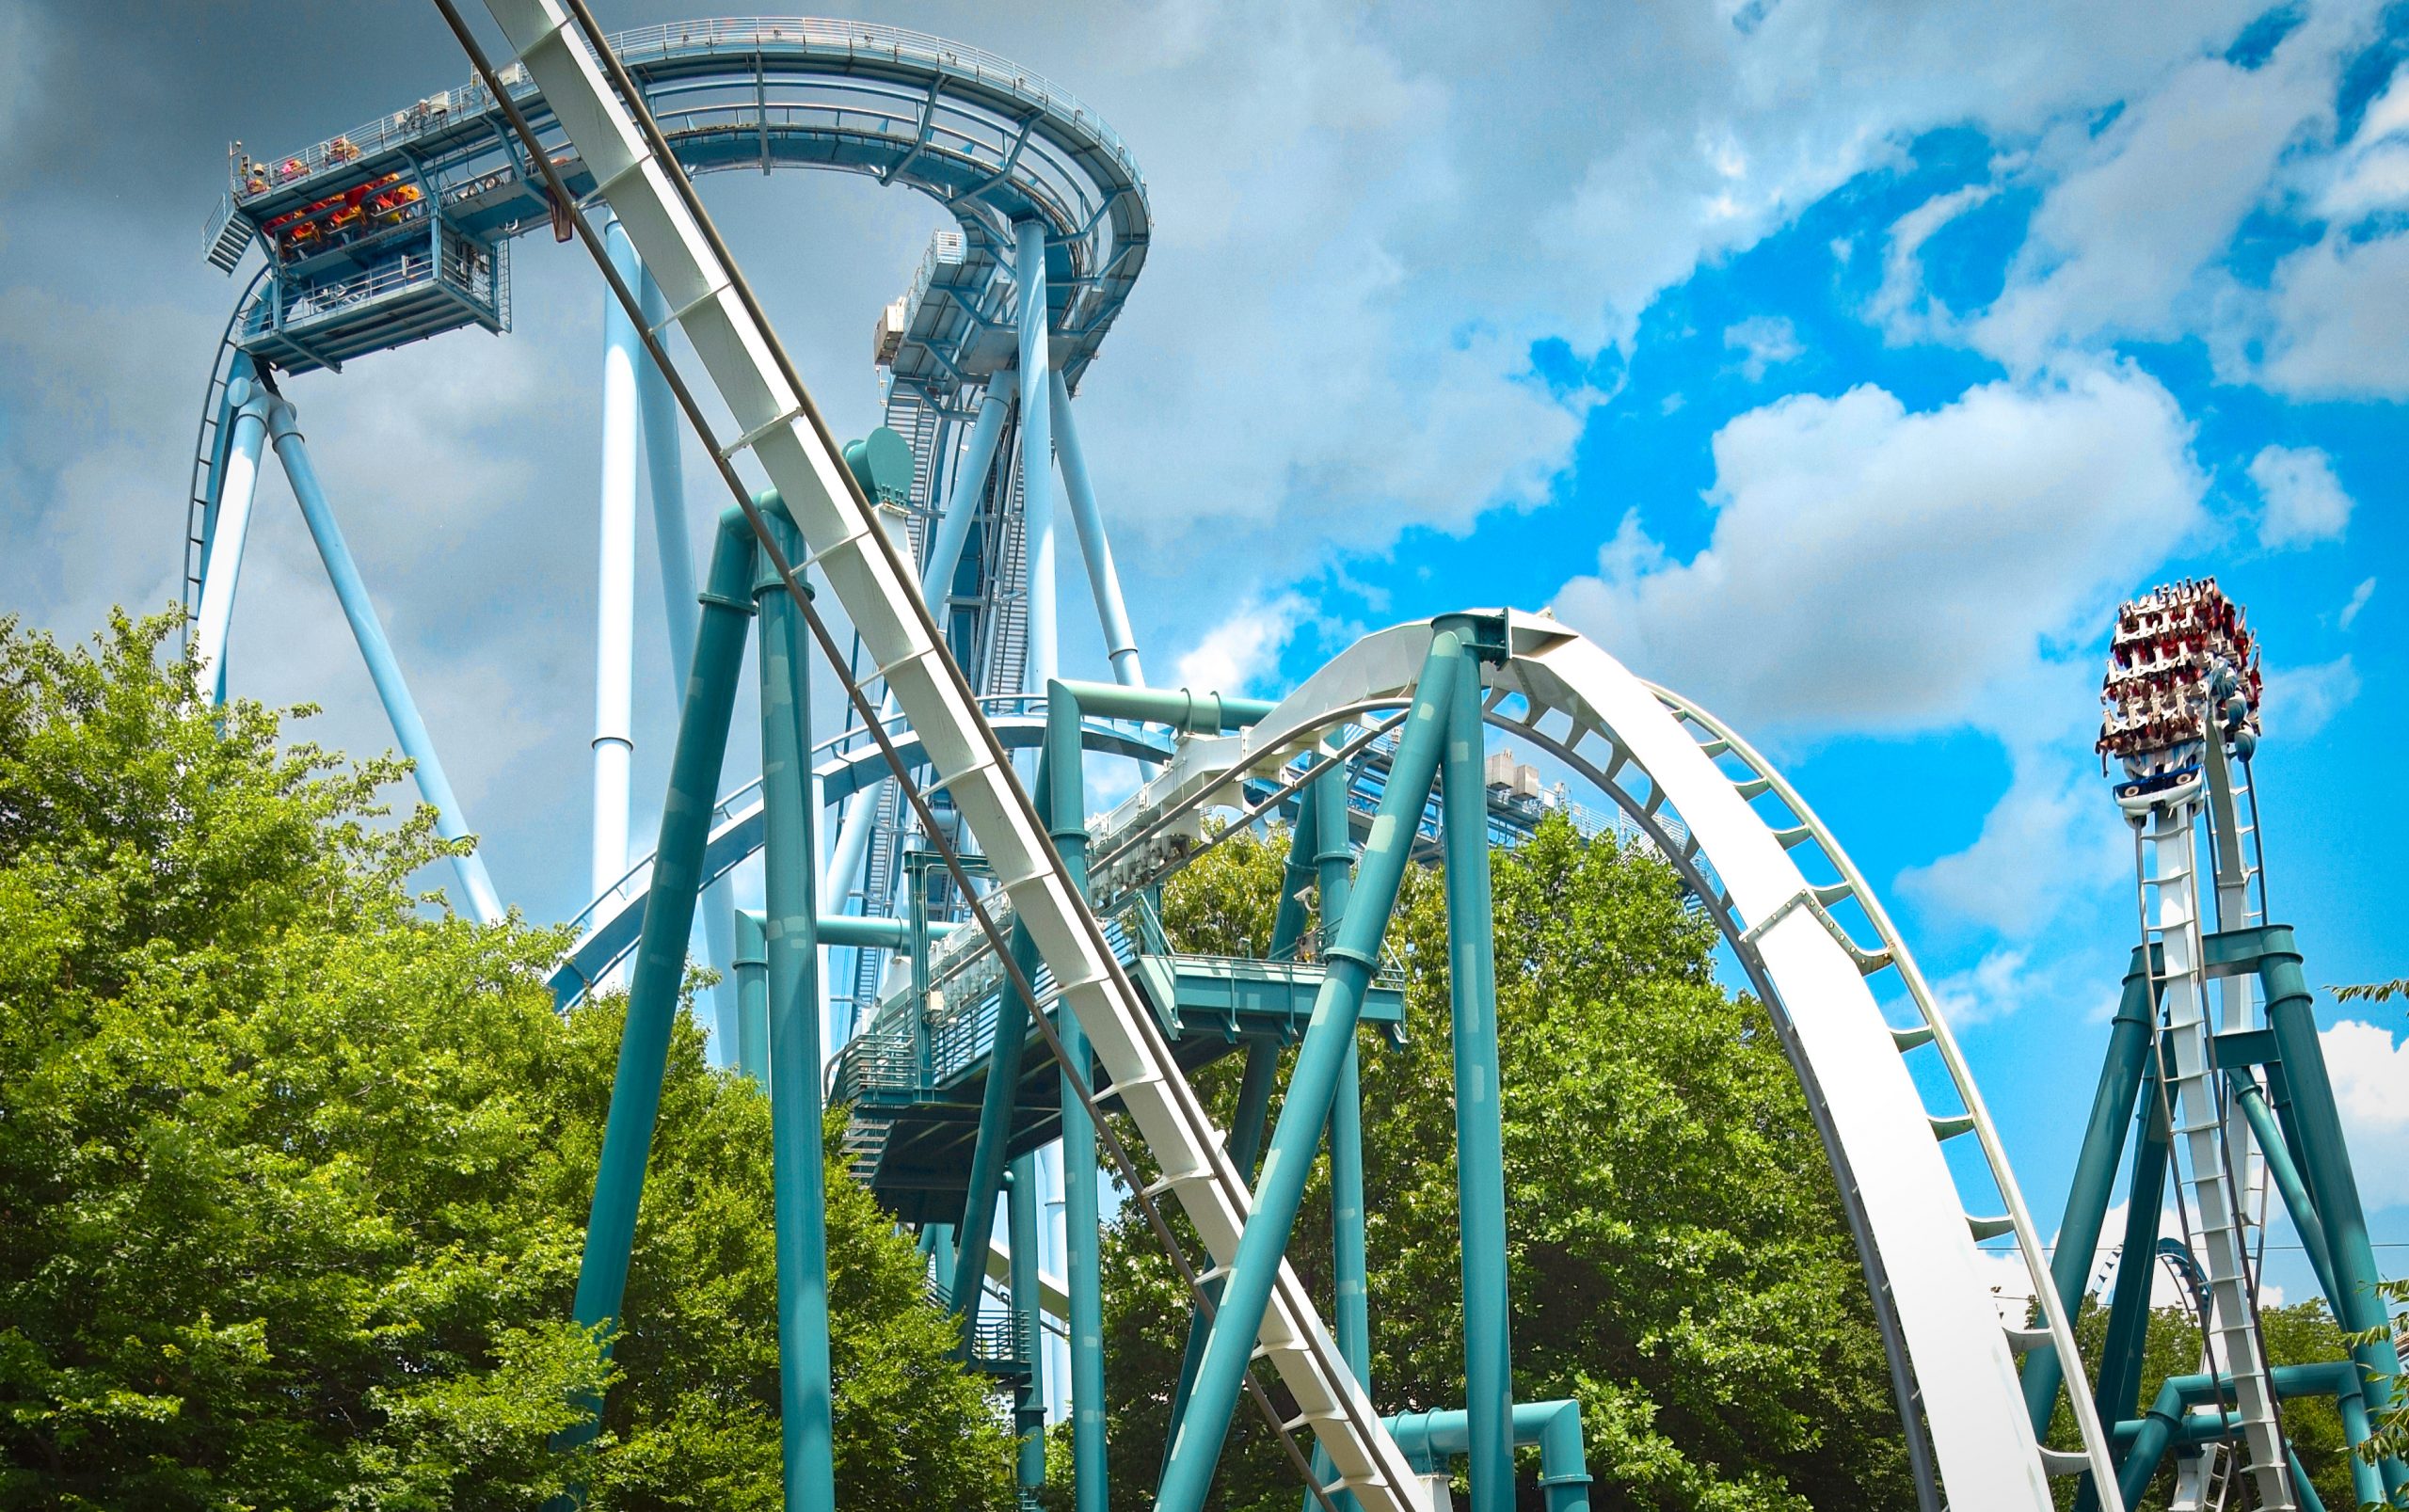 The Fastest Roller Coasters At Busch Gardens, Ranked